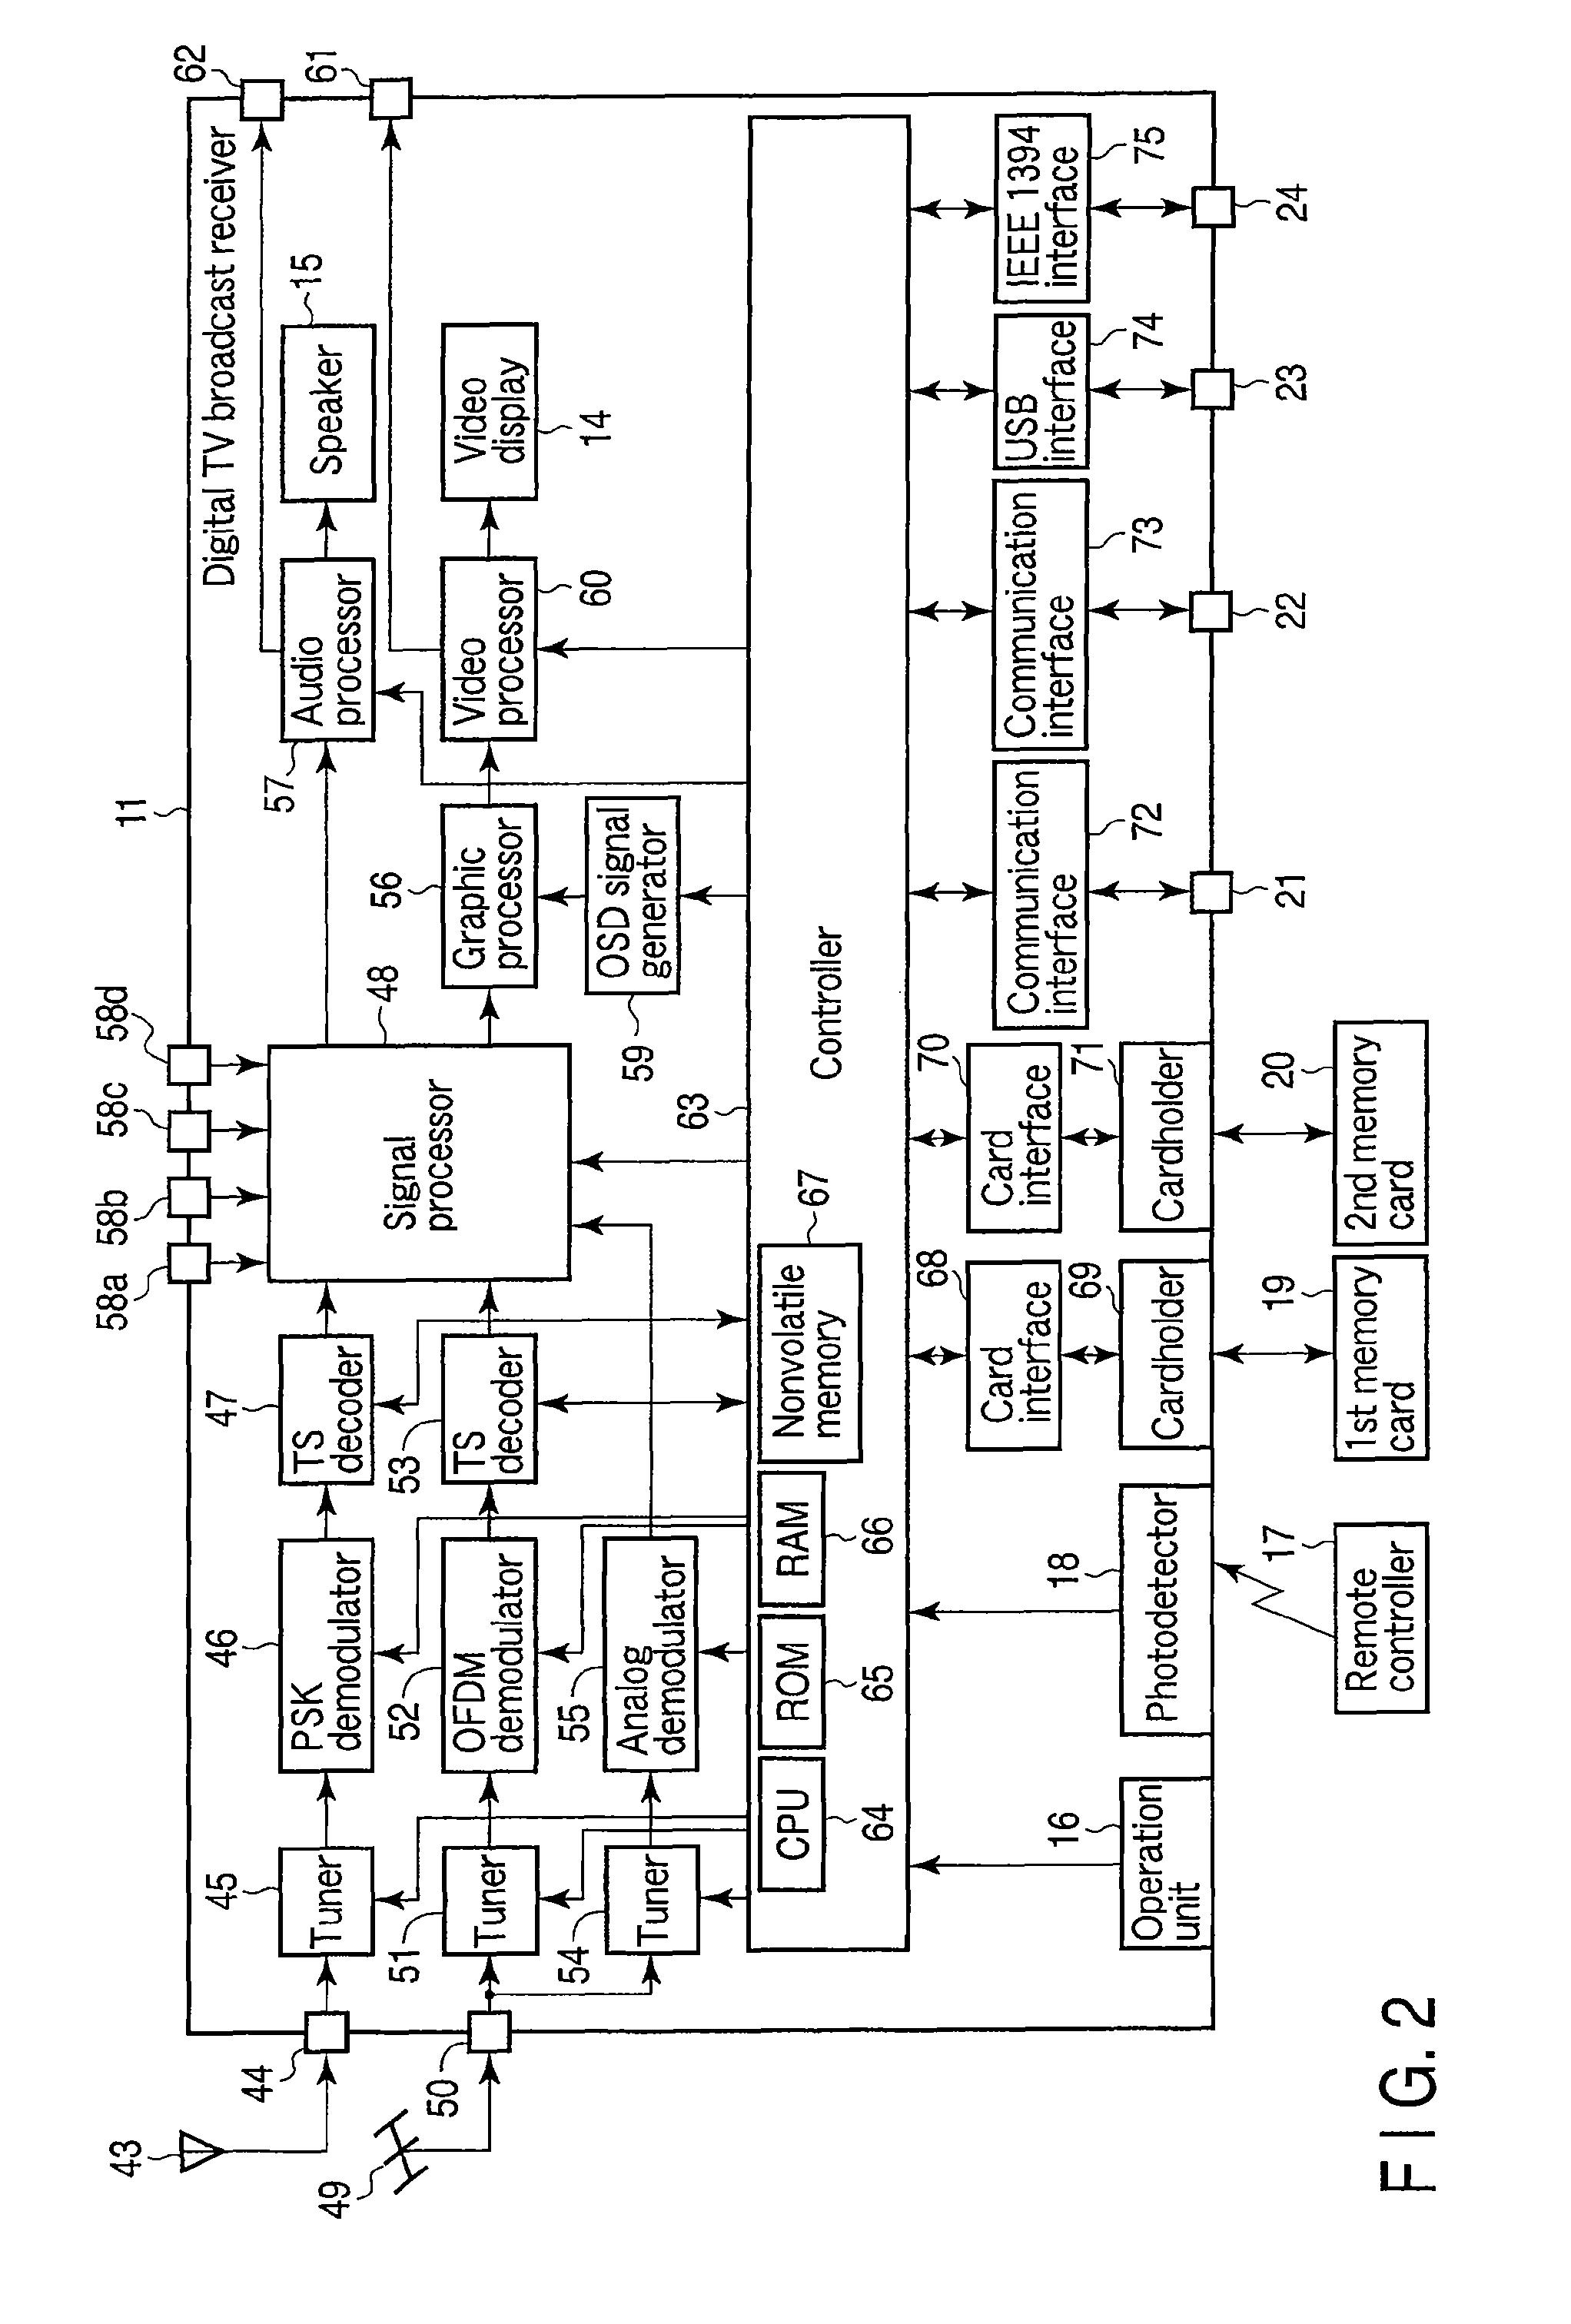 Apparatus, method, and program for sound quality correction based on identification of a speech signal and a music signal from an input audio signal